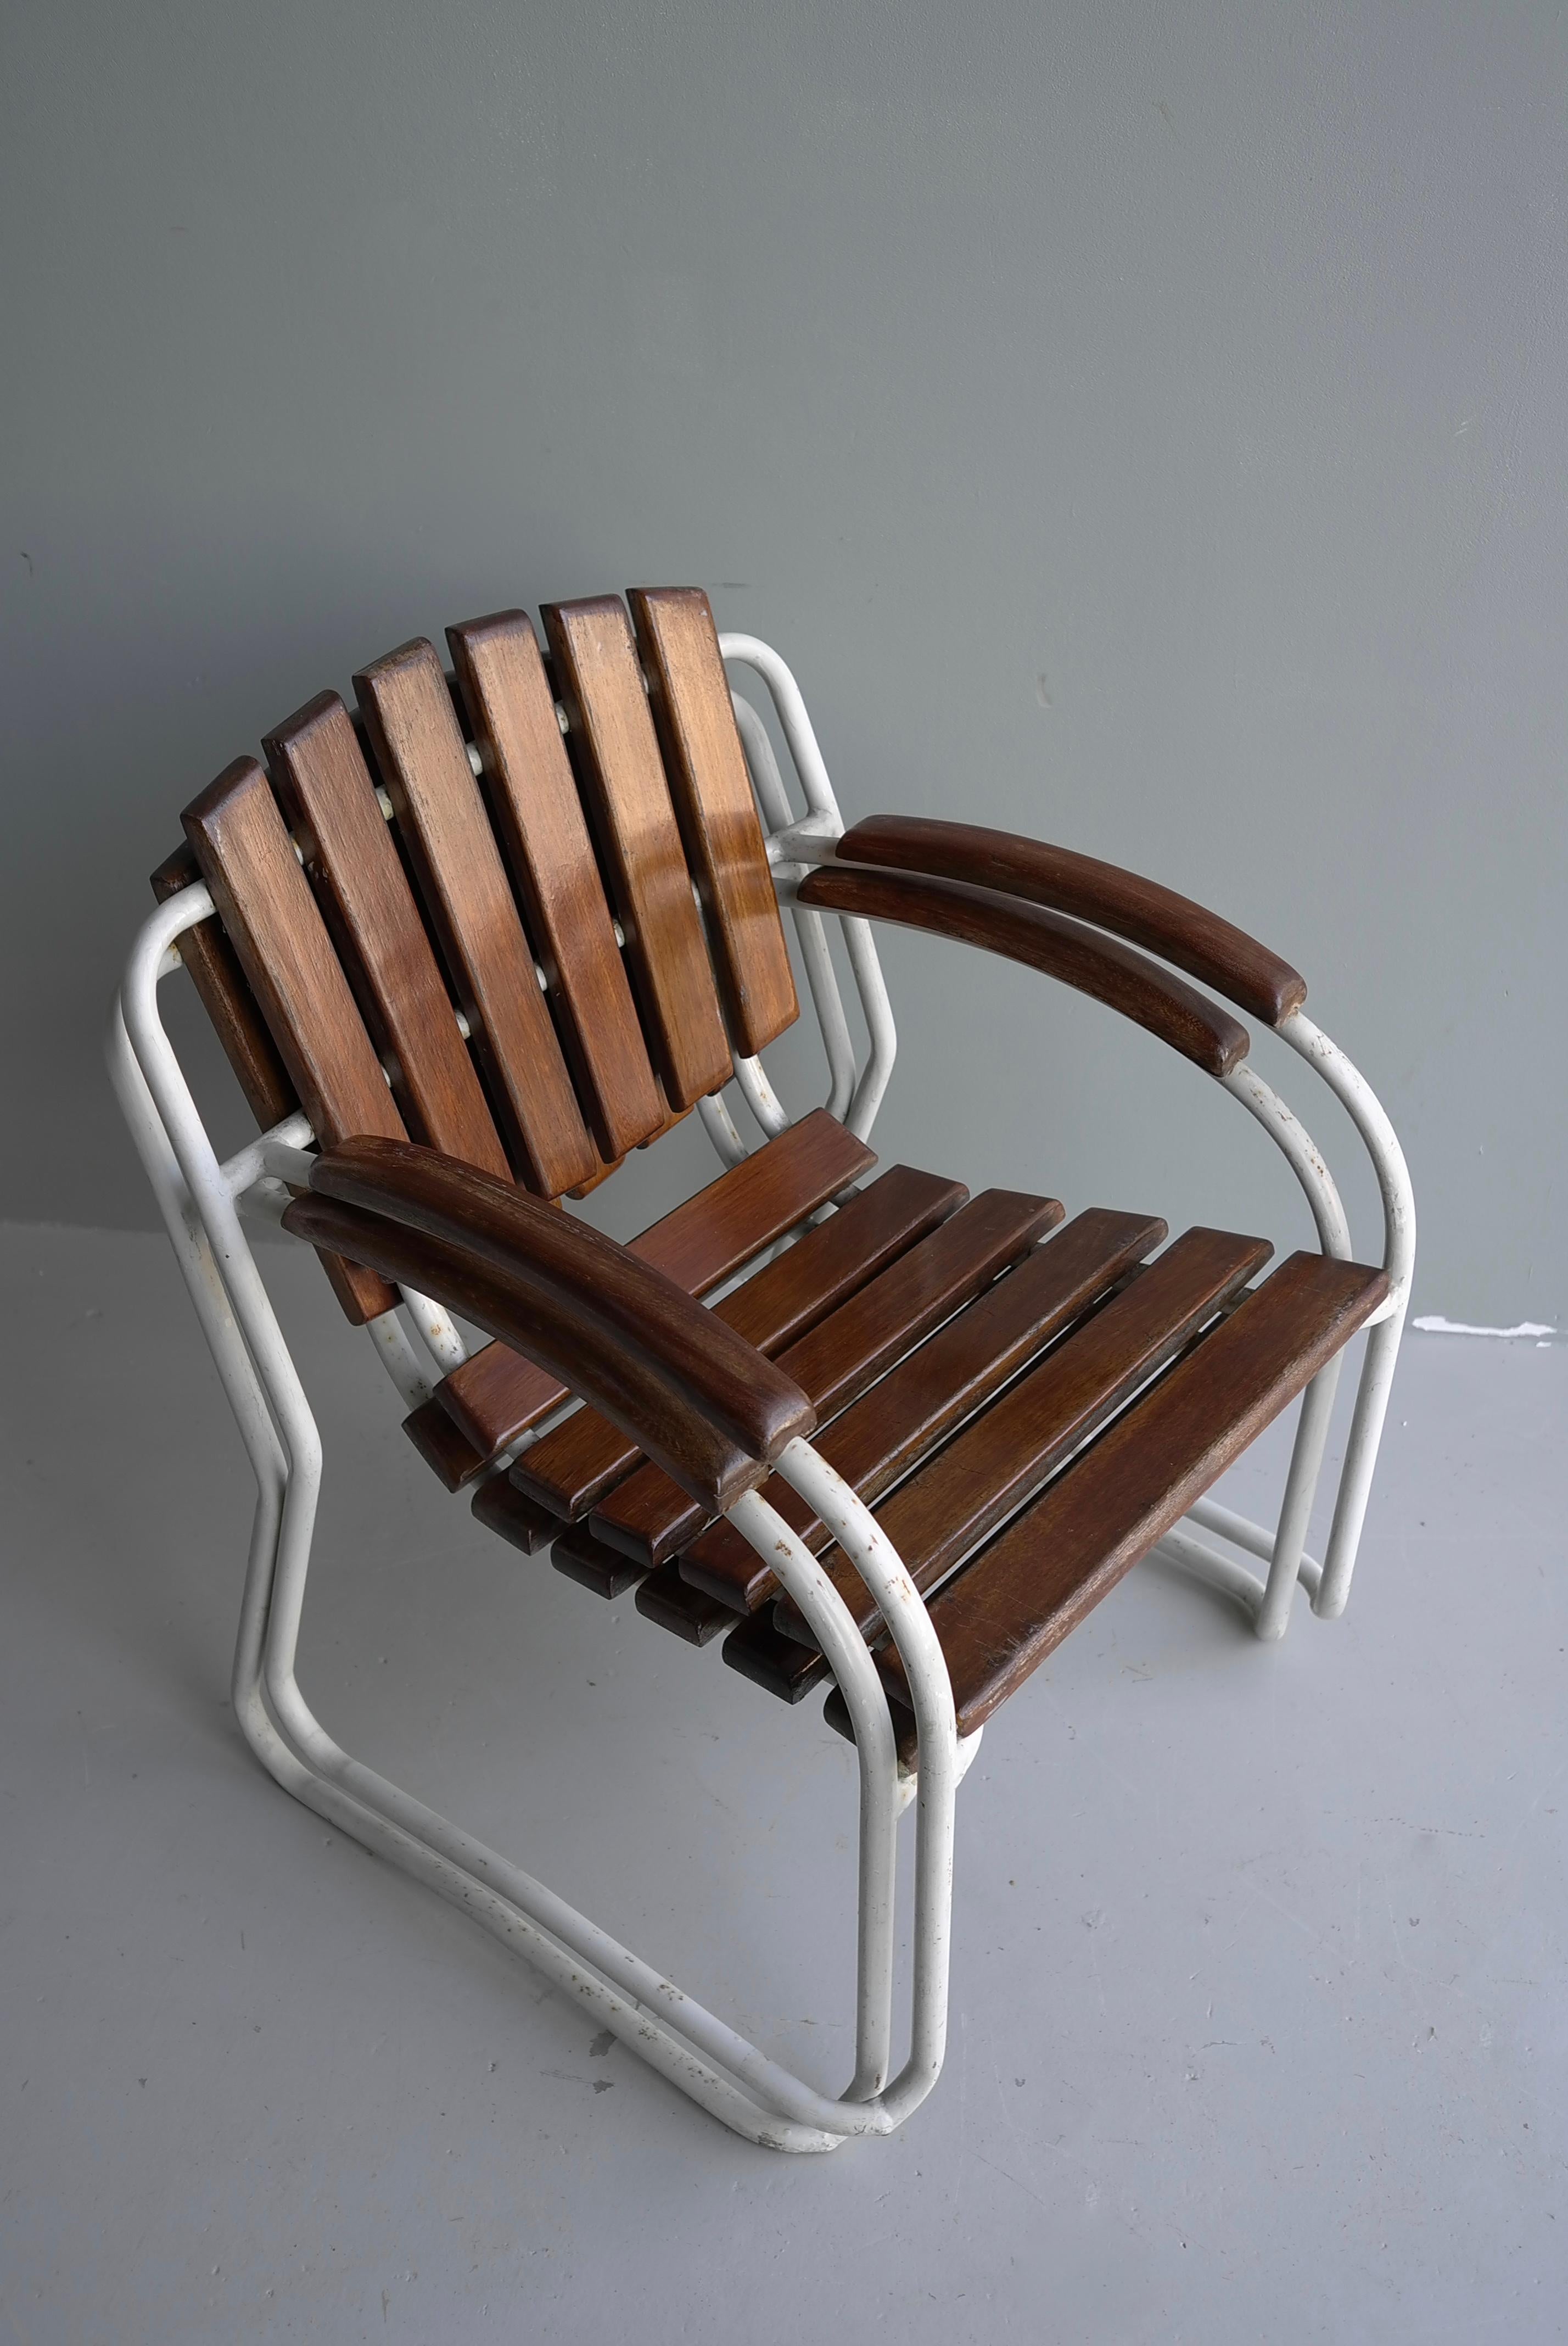 4x Tubular Frame and Slatwood Stackable Garden Chairs, 1930's For Sale 3